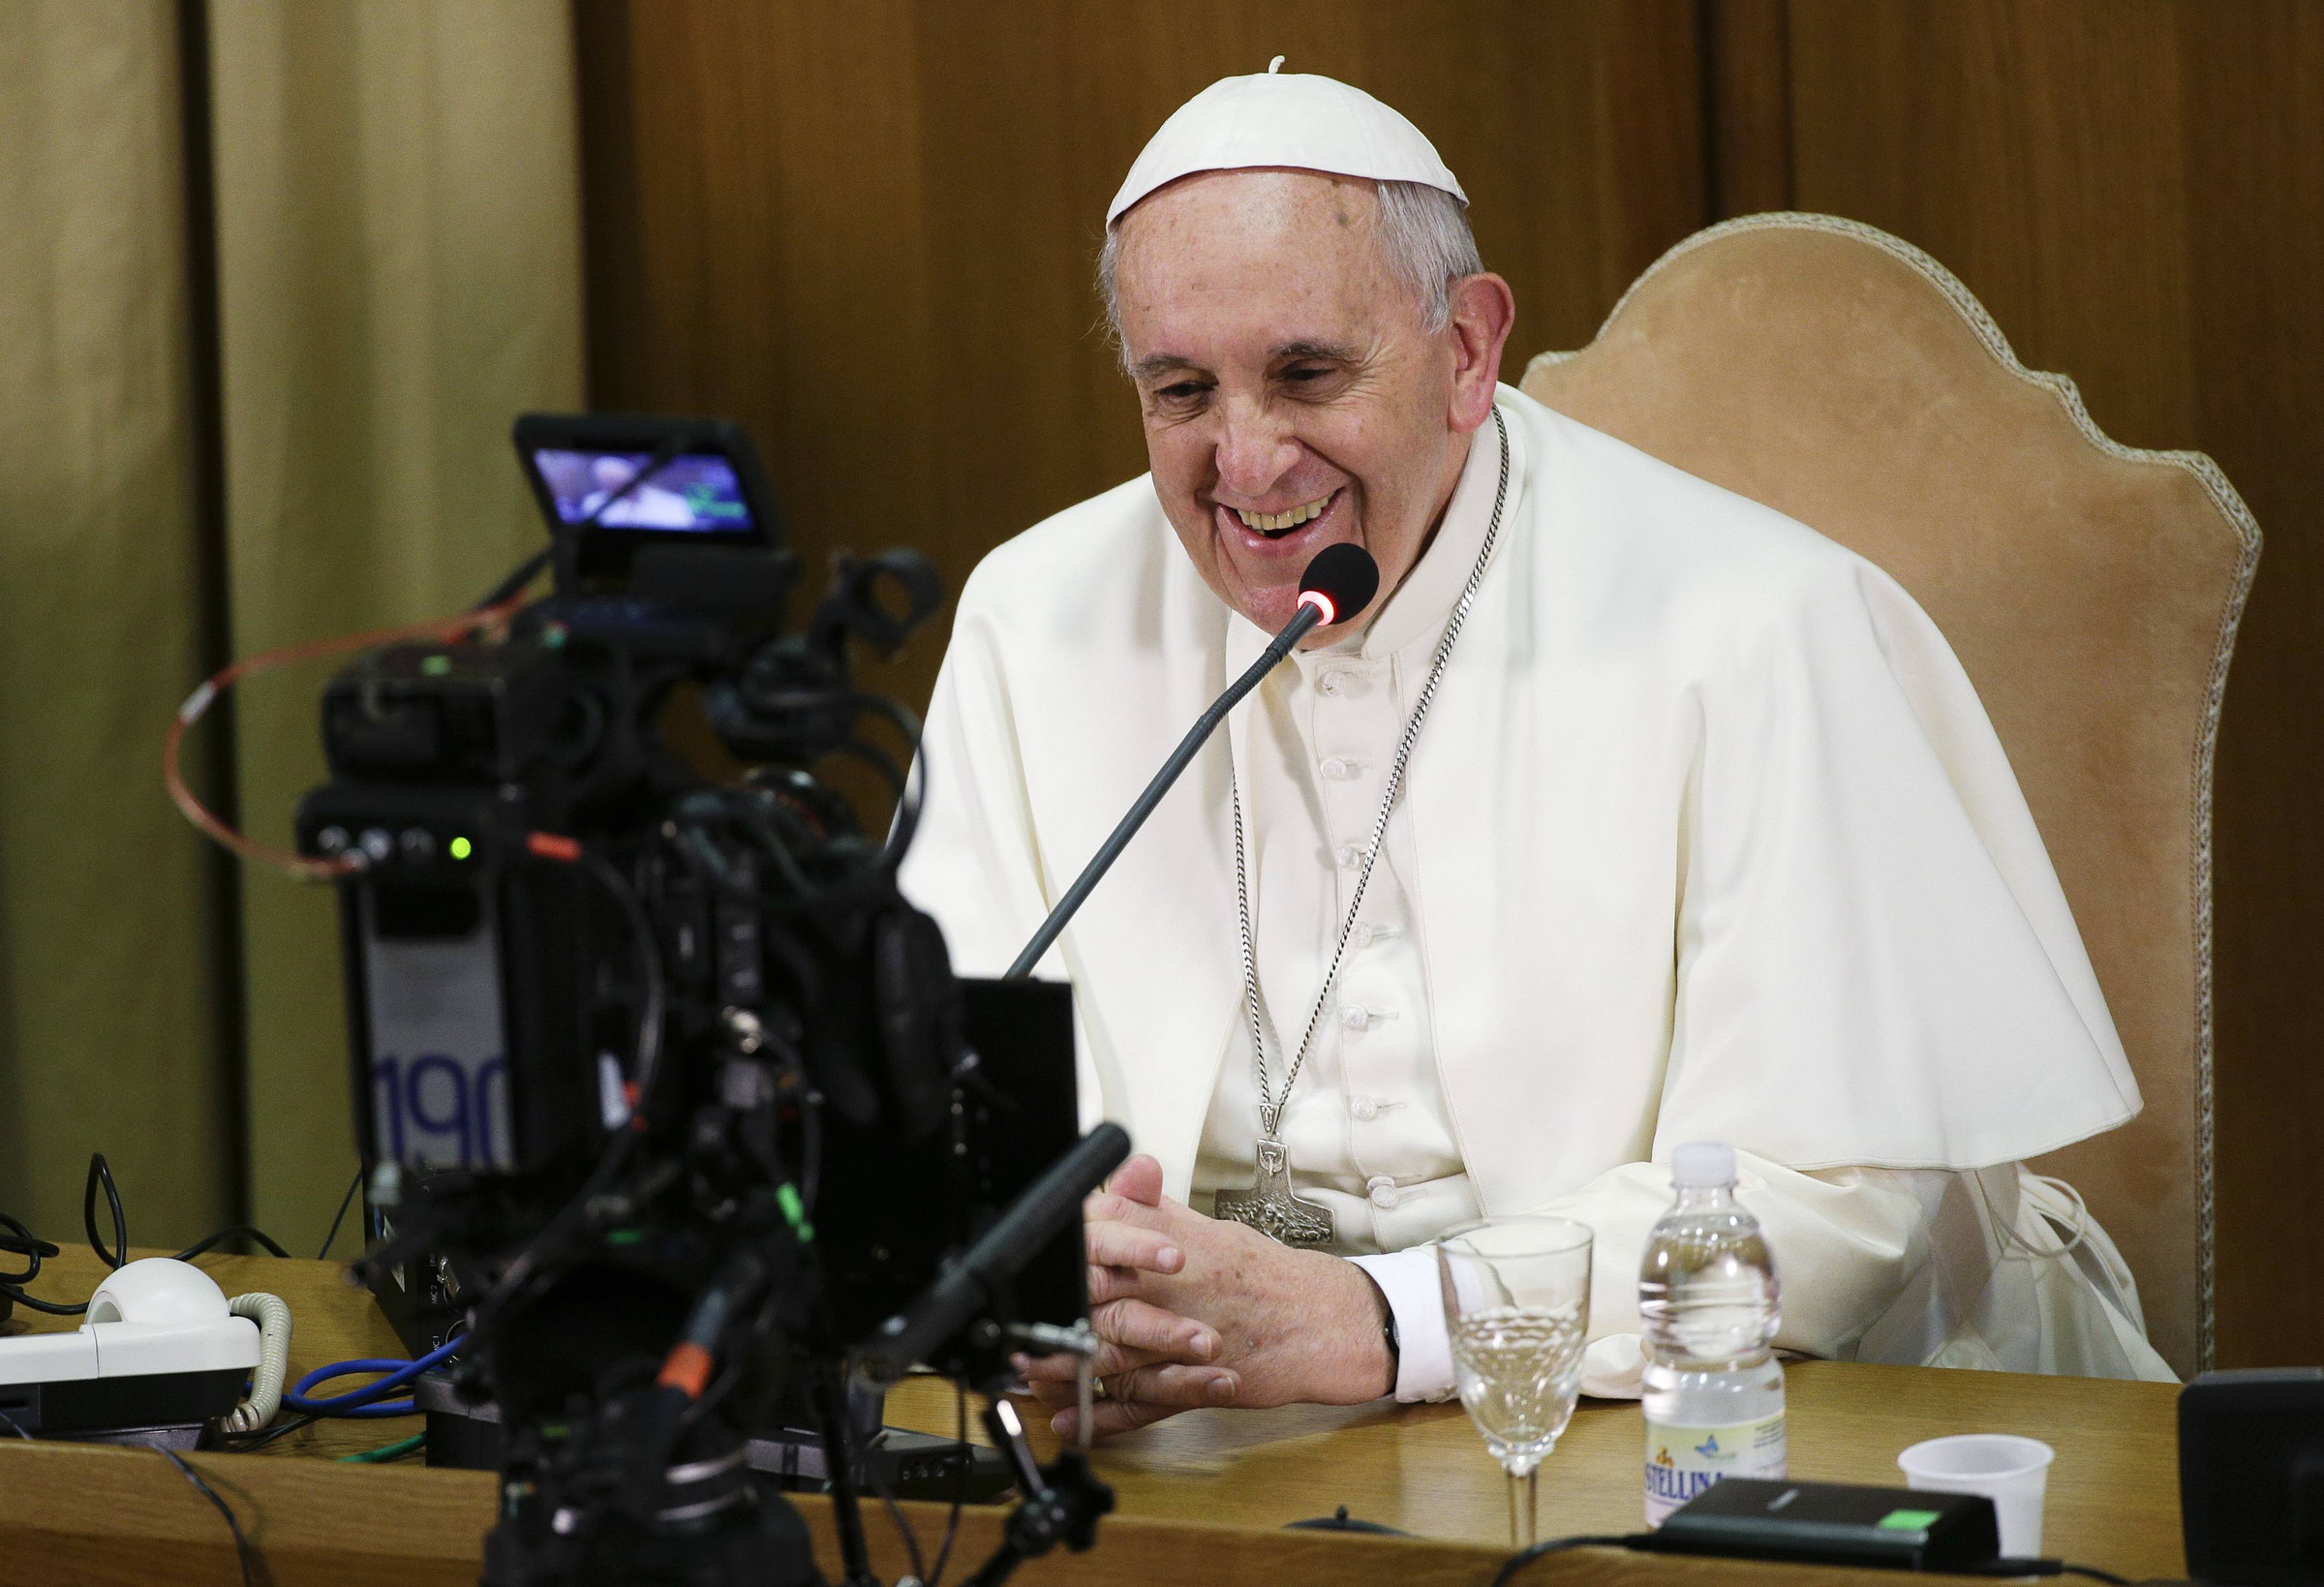 Pope Francis looks into to a camera during a worldwide broadcast online as he leads a meeting for the Fourth World Congress of Educational Scholas Occurrentes in the synod hall at the Vatican Feb. 5. (CNS/Reuters/Max Rossi)